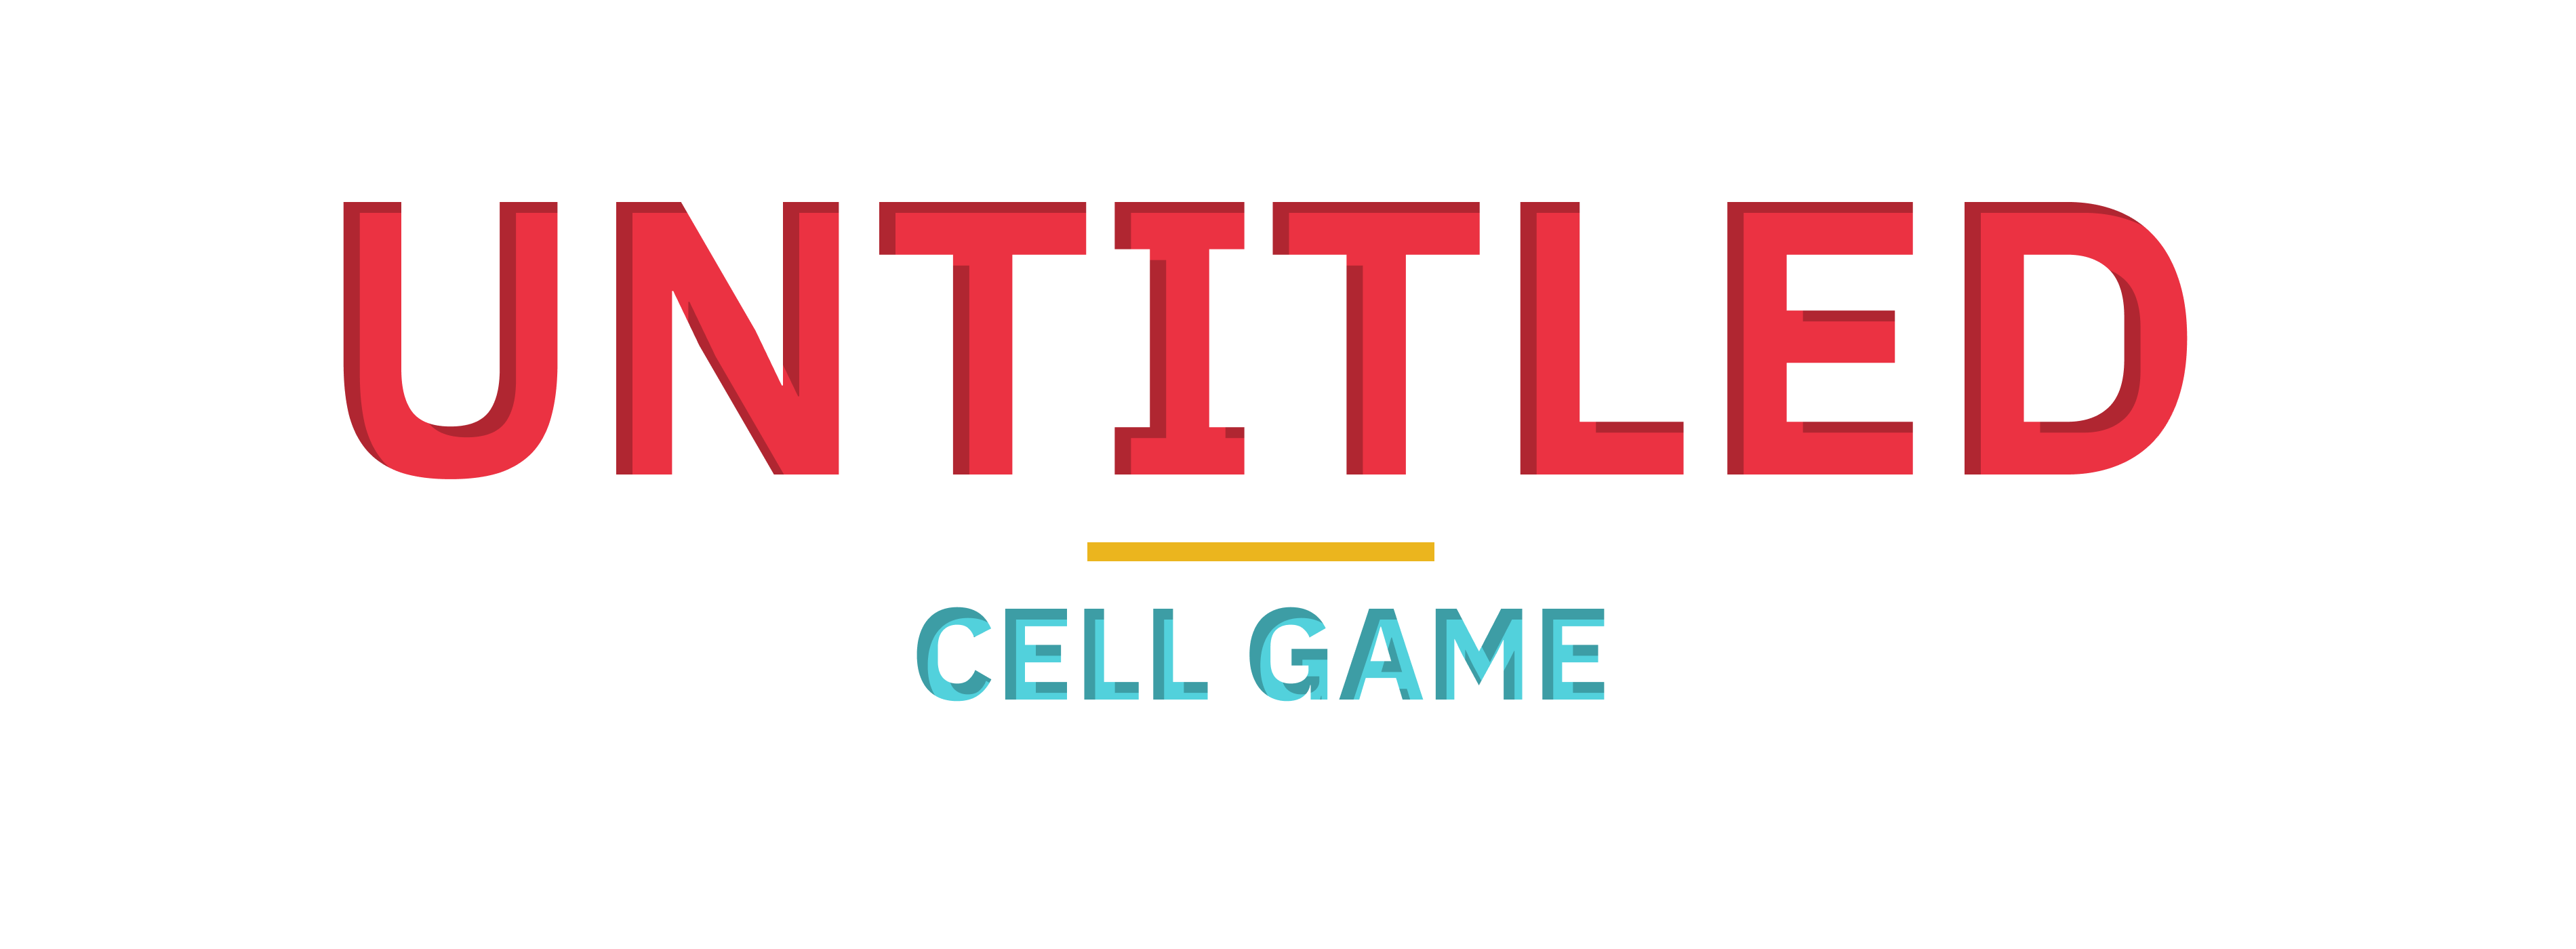 Untitled Cell Game